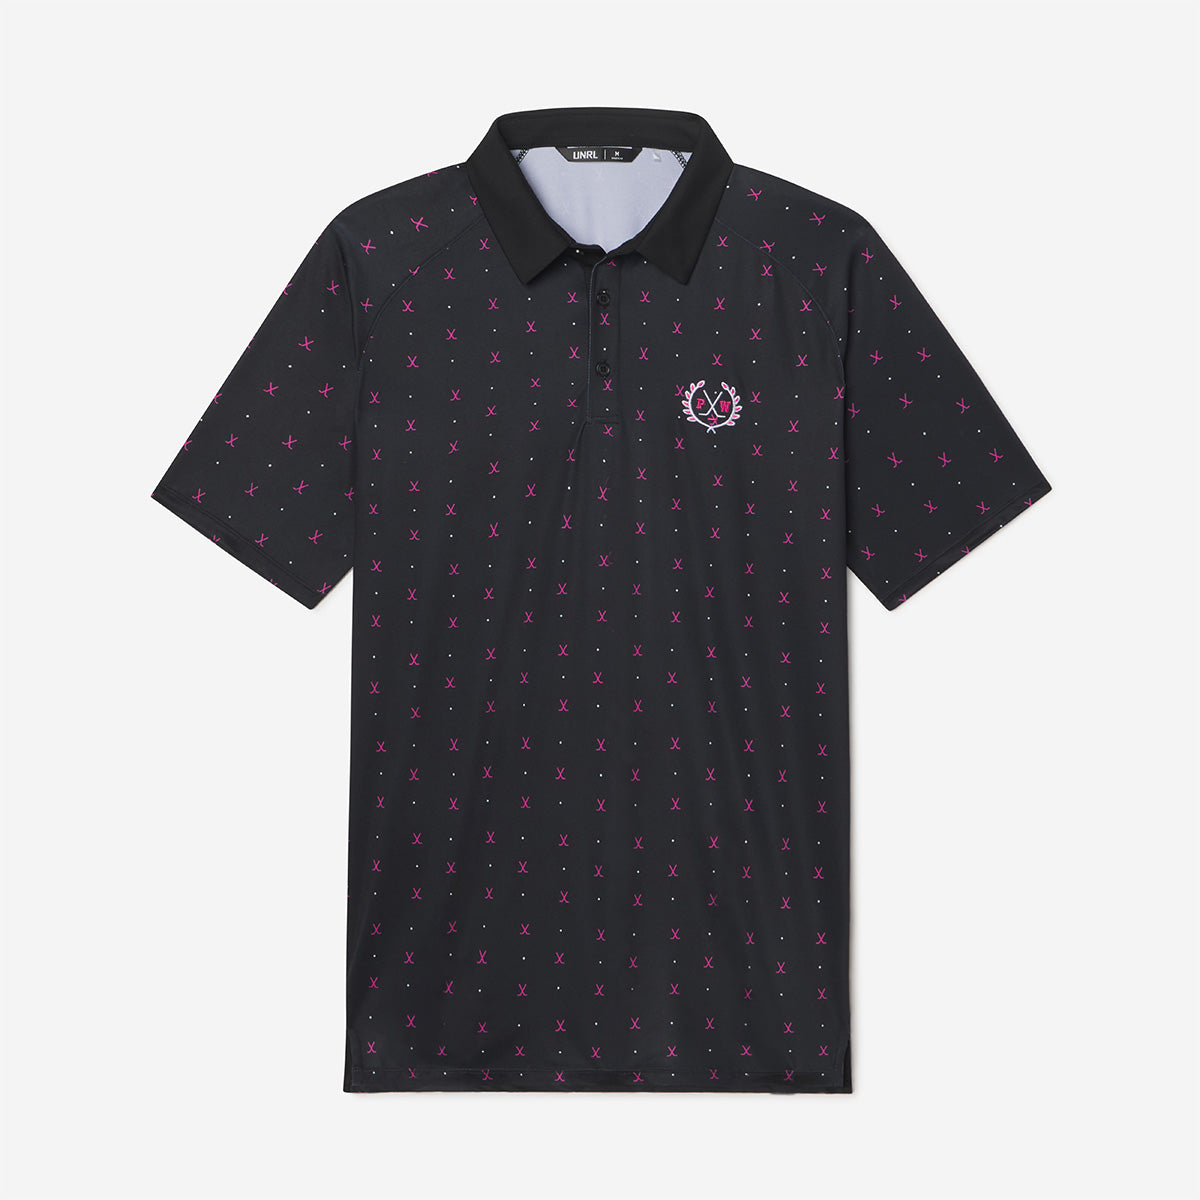 UNRL x Pink Whitney Crest Printed Polo